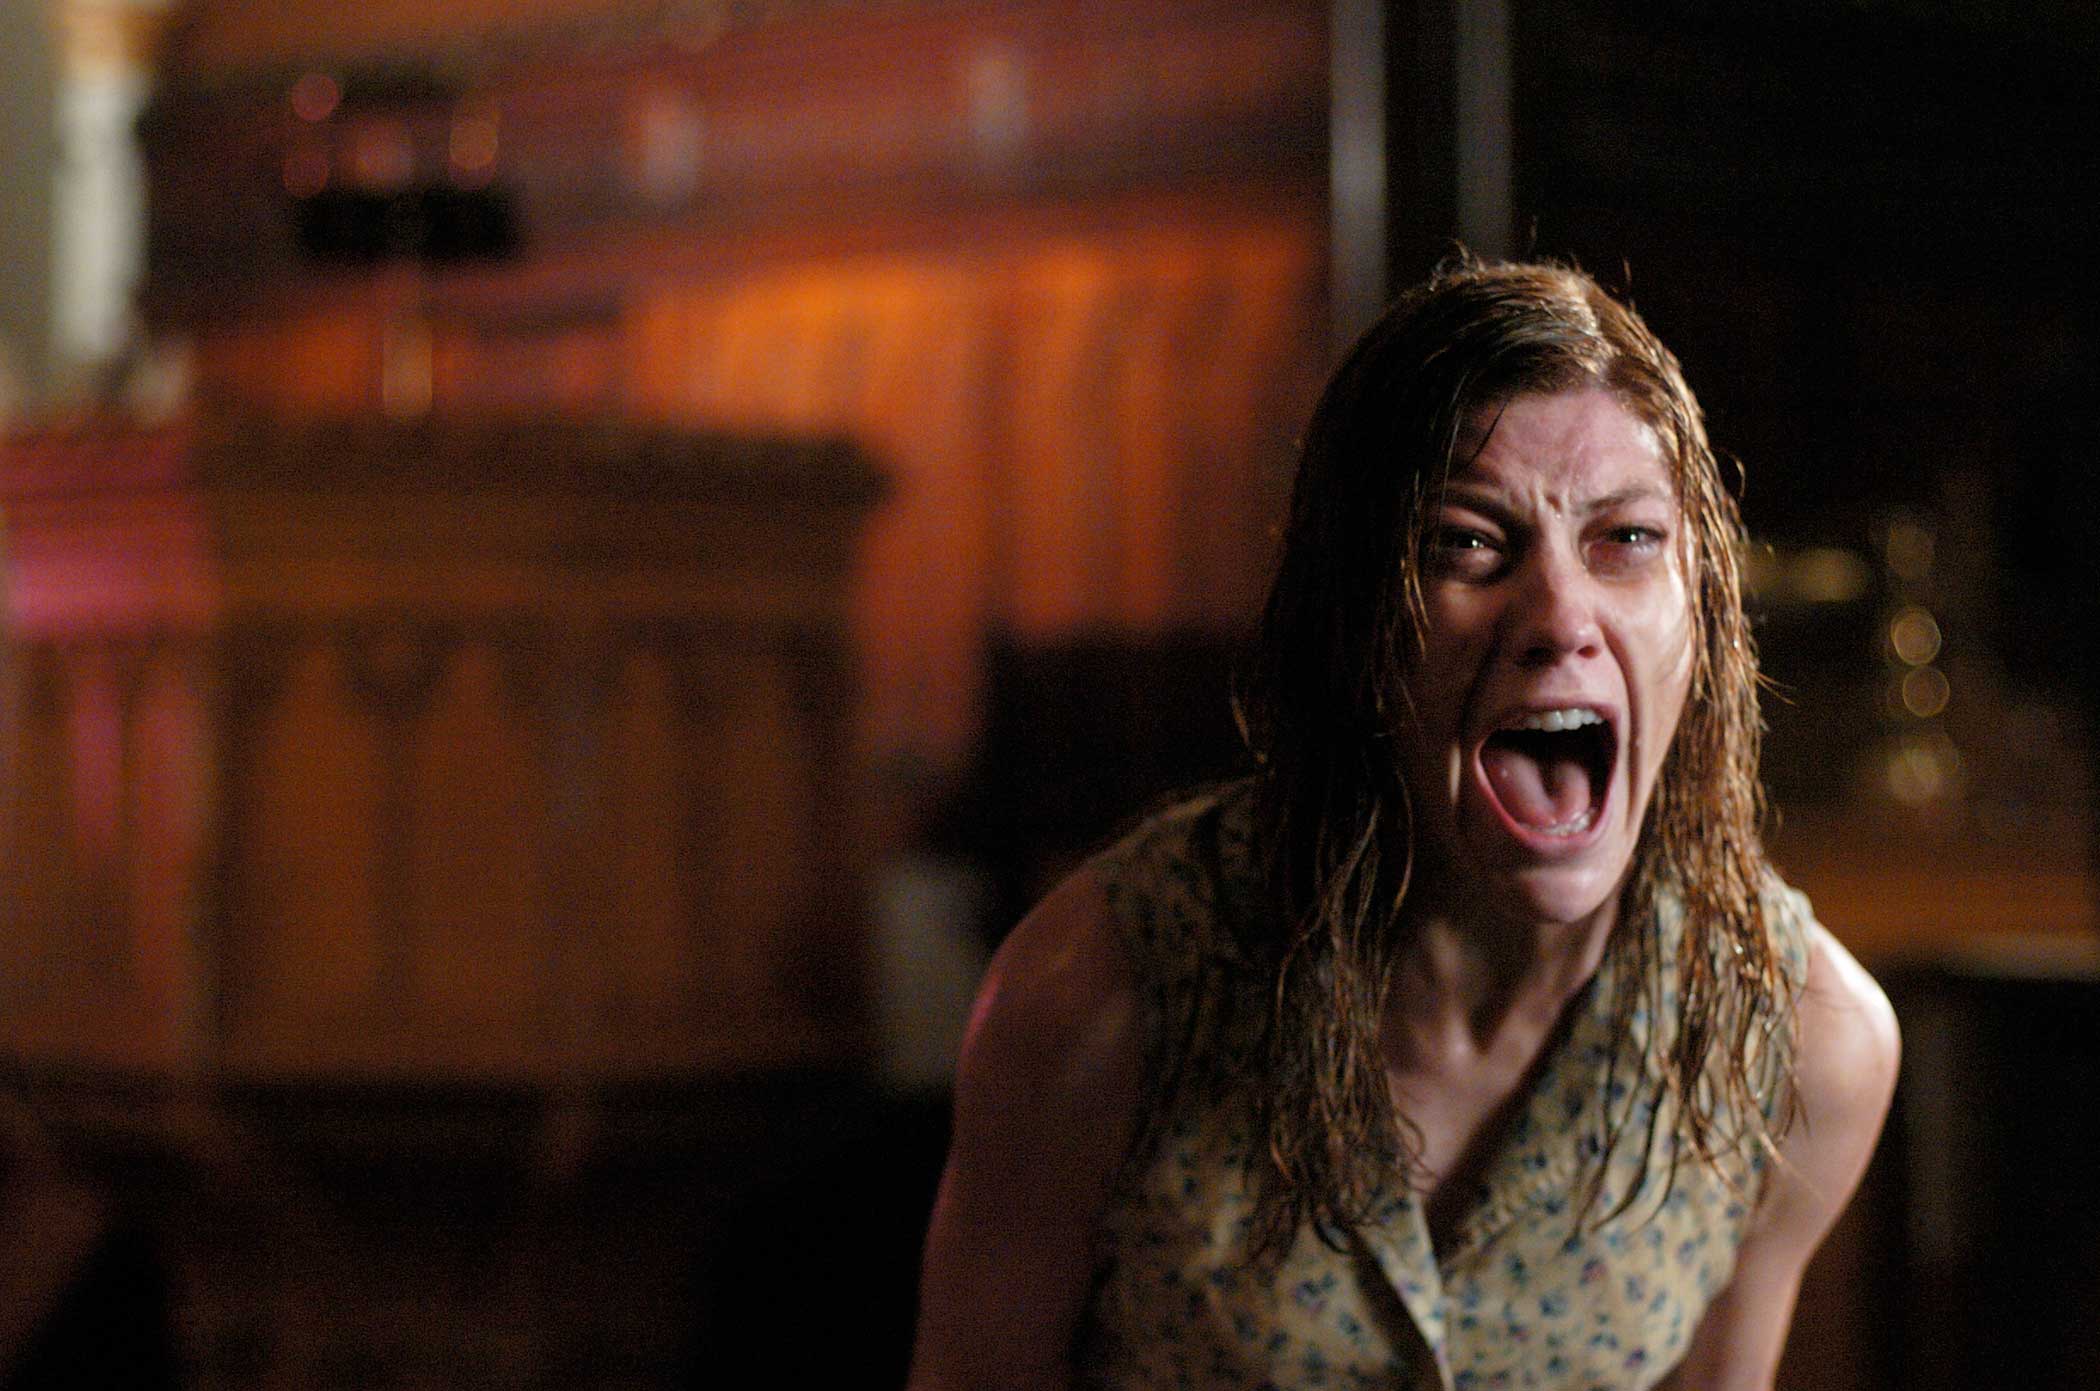 The Exorcism of Emily Rose, 2005  The film is loosely based on the story of Anneliese Michel, a German woman who underwent a Catholic exorcism in 1975, but died in 1976 due to malnourishment and dehydration. Her parents and the priests involved were charged with negligent homicide.